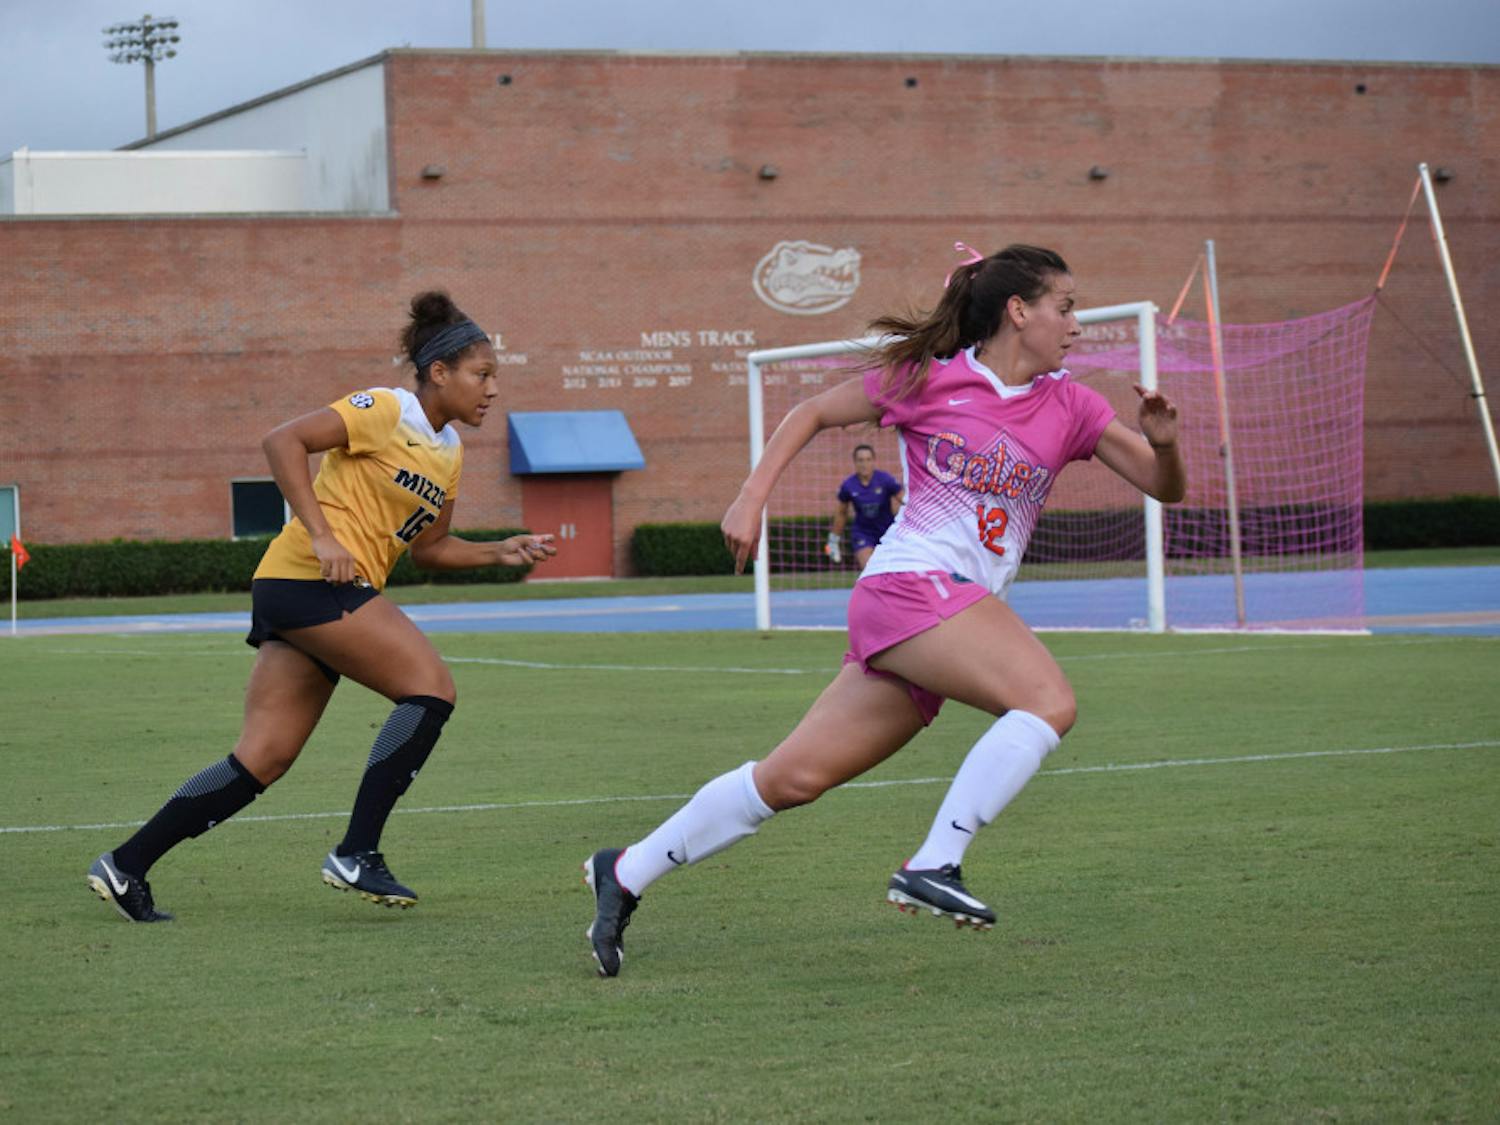 Midfielder Sammie Betters has scored on her only two shots this season.